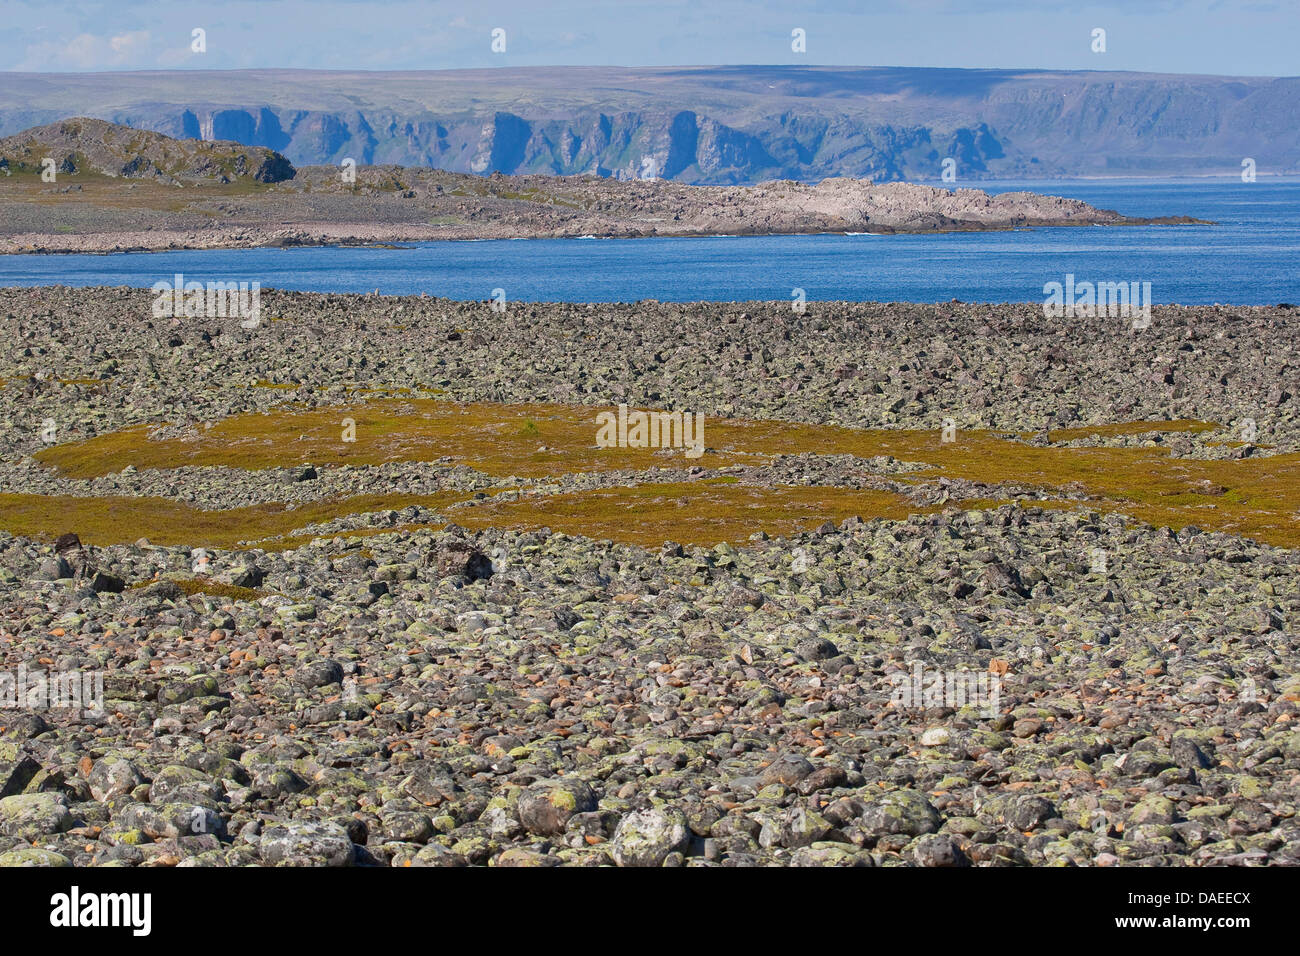 boulders covered with lichens at the shore, Norway, Varanger Peninsula, Lapland Stock Photo